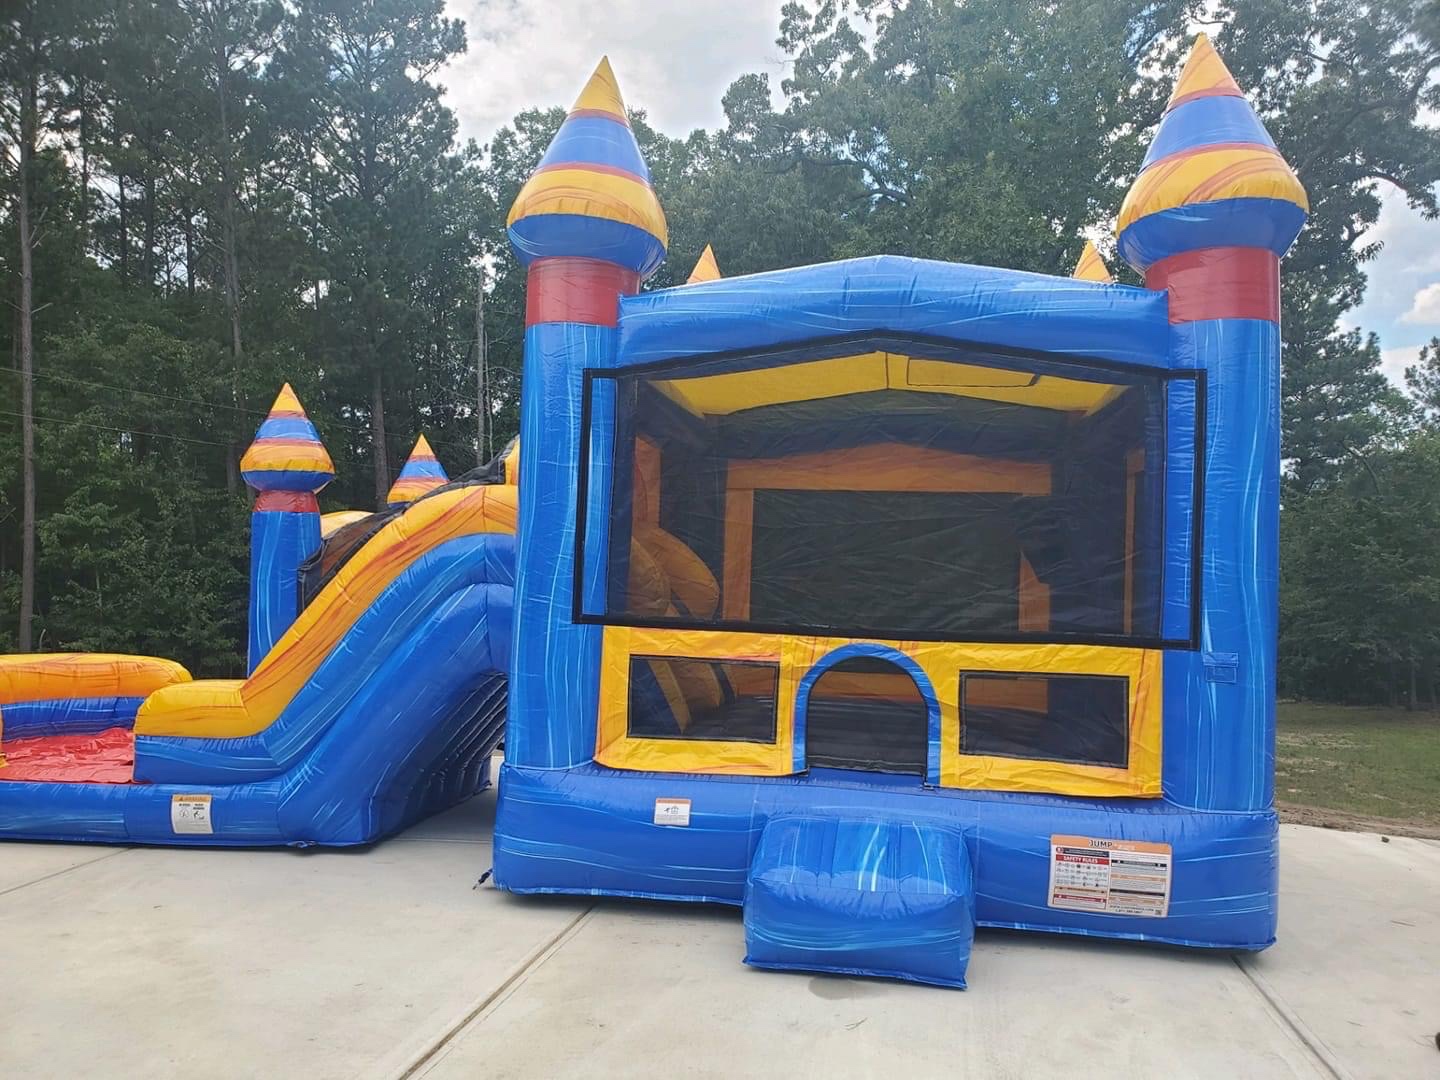 Melting Arctic Bounce House Water Slide Combination Fun Biloxi Bounce House & Water Slides